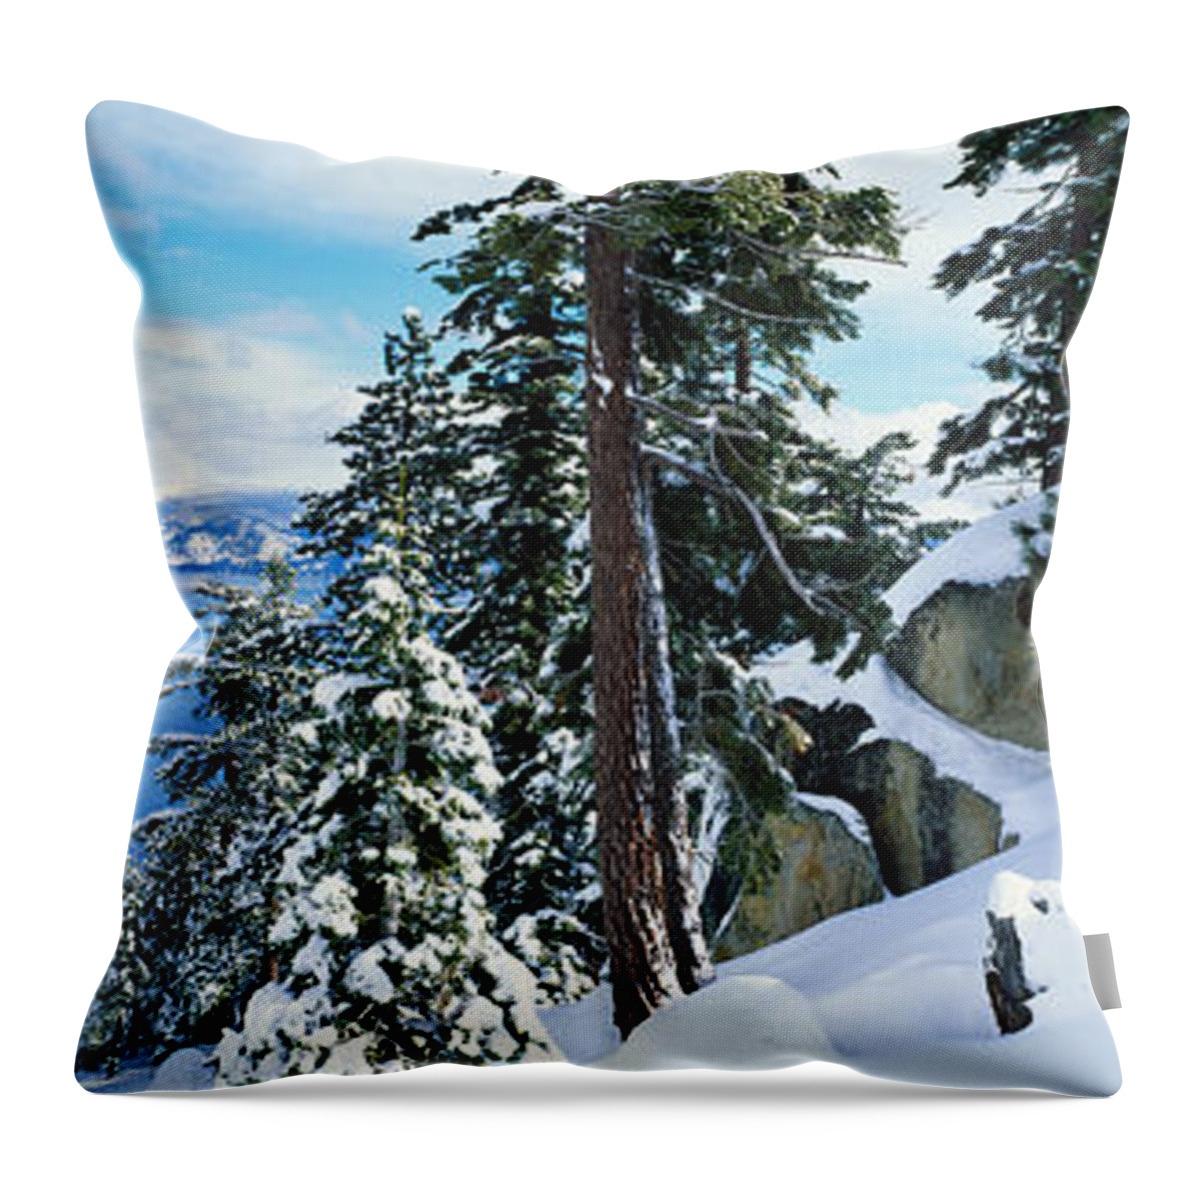 Photography Throw Pillow featuring the photograph Snow Covered Trees On Mountainside by Panoramic Images